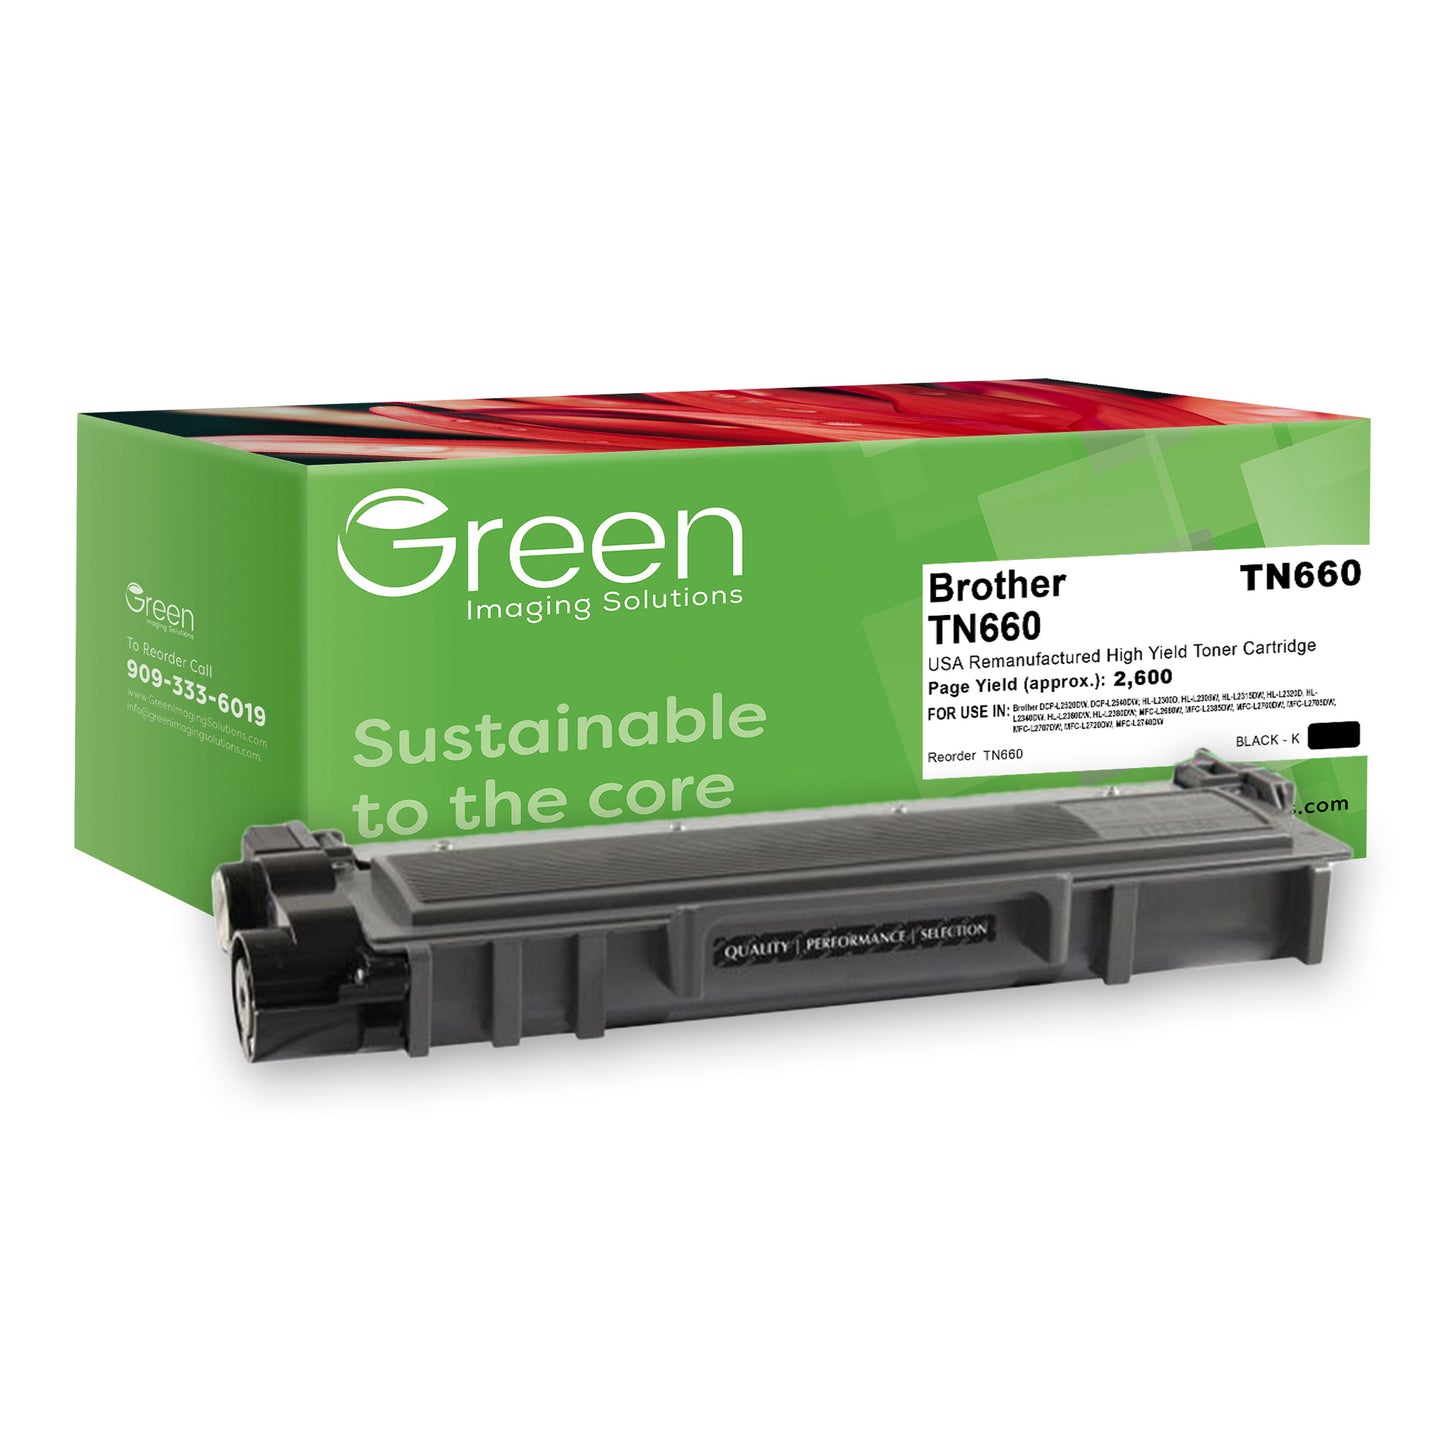 Green Imaging Solutions USA Remanufactured High Yield Toner Cartridge for Brother TN660